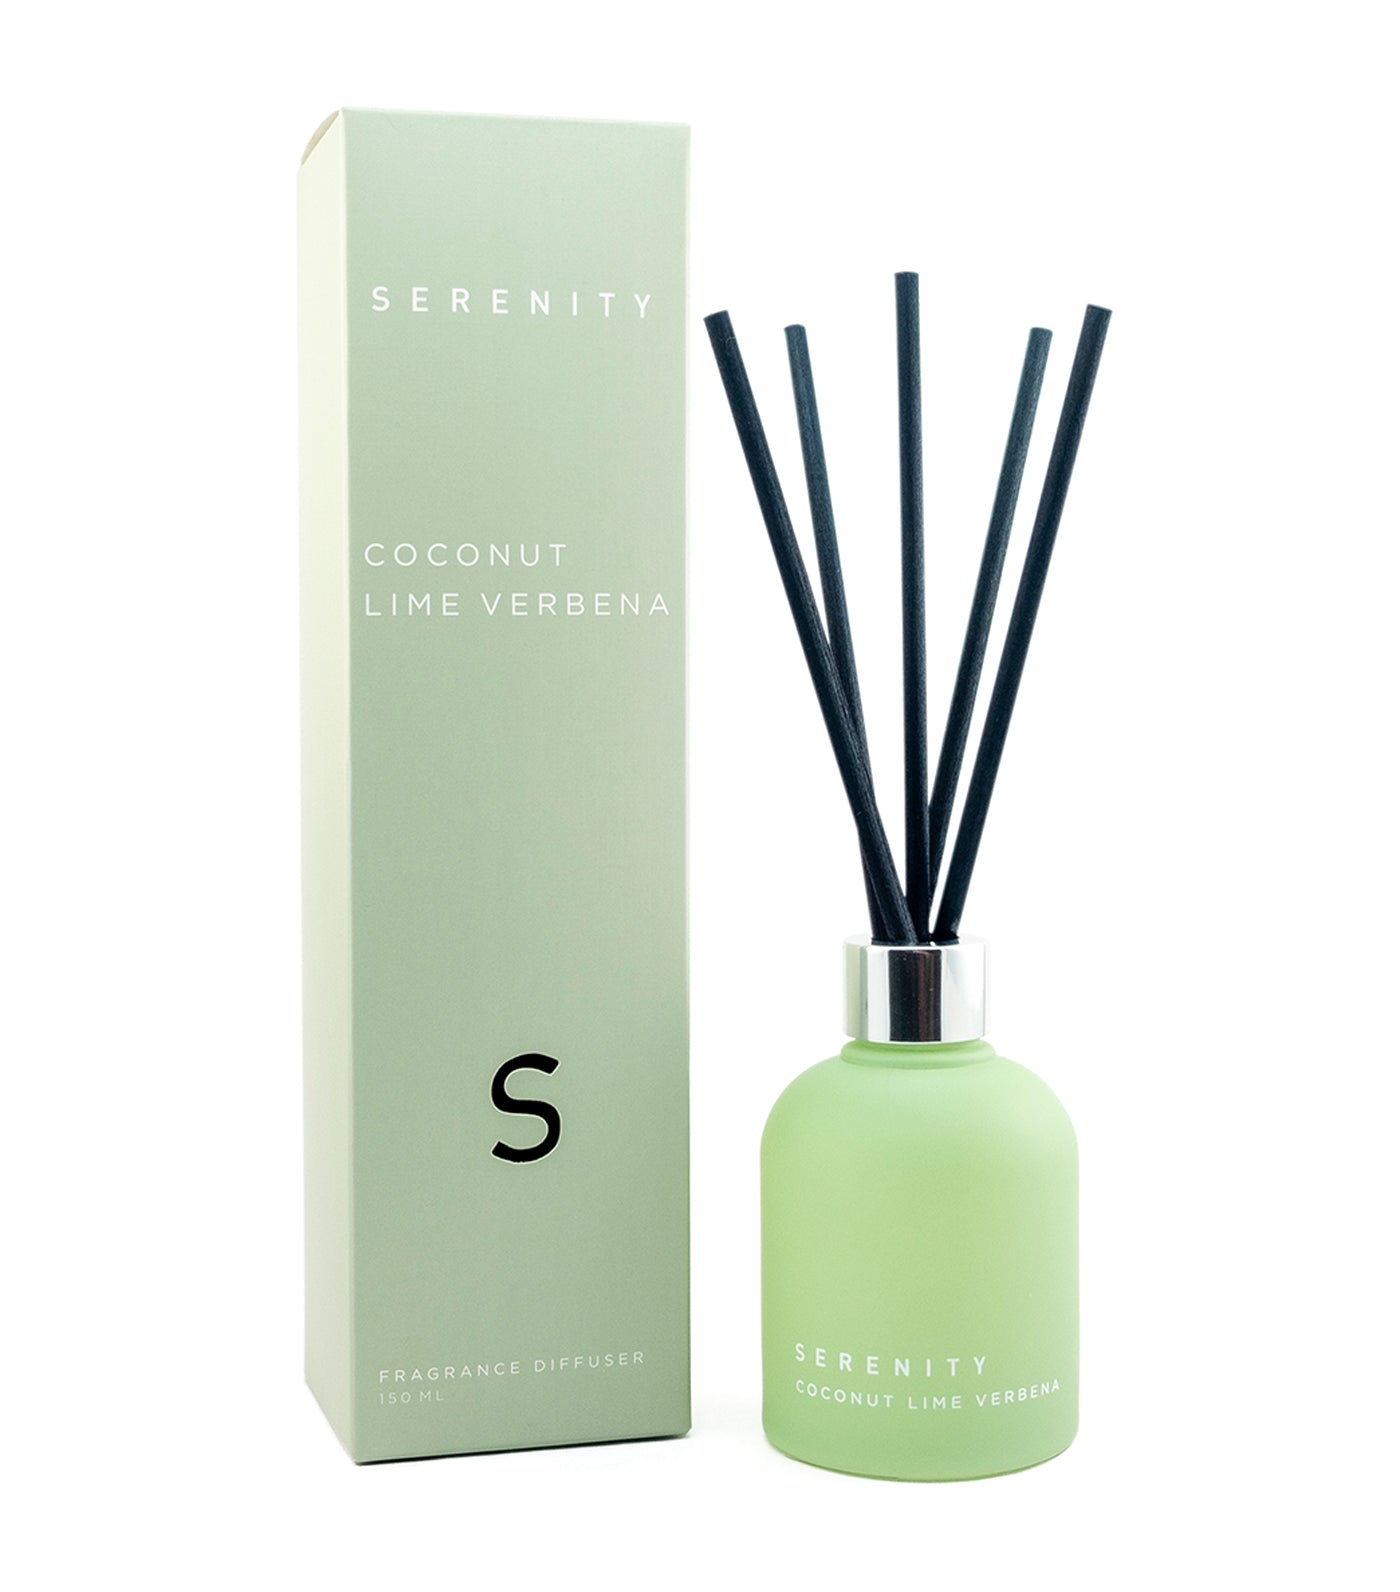 serenity coconut lime verbena 150ml reed diffuser